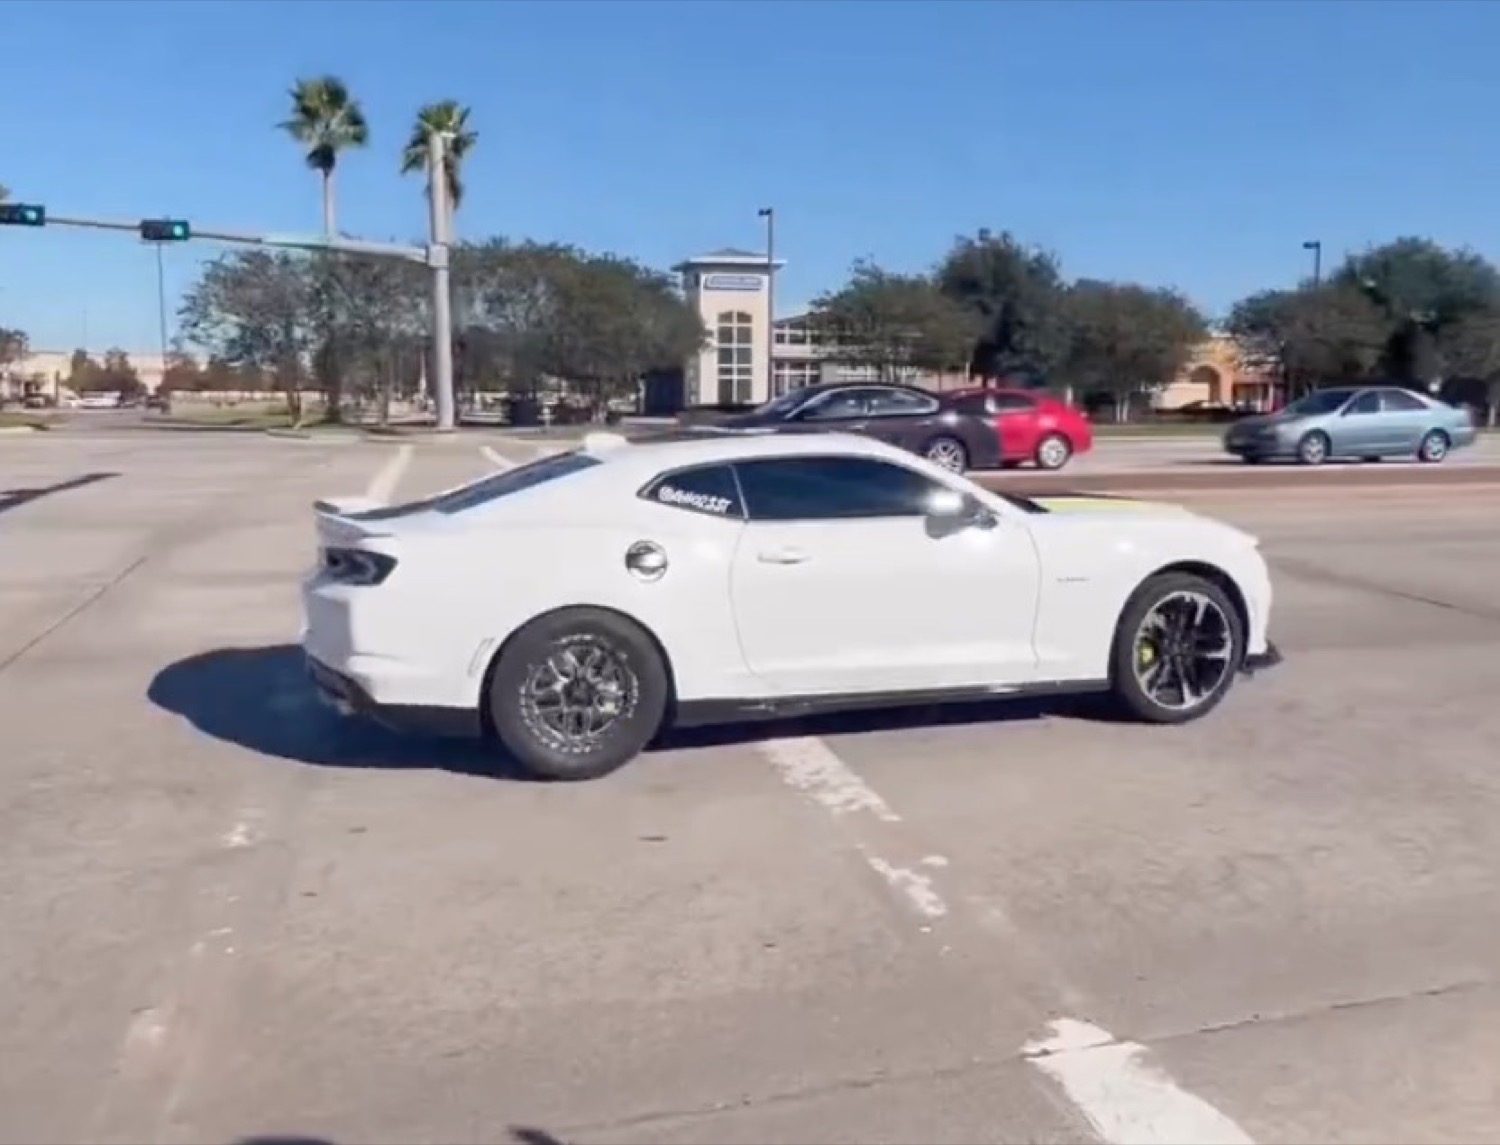 Chevy Camaro Driver Loses It, But Gets Lucky: Video